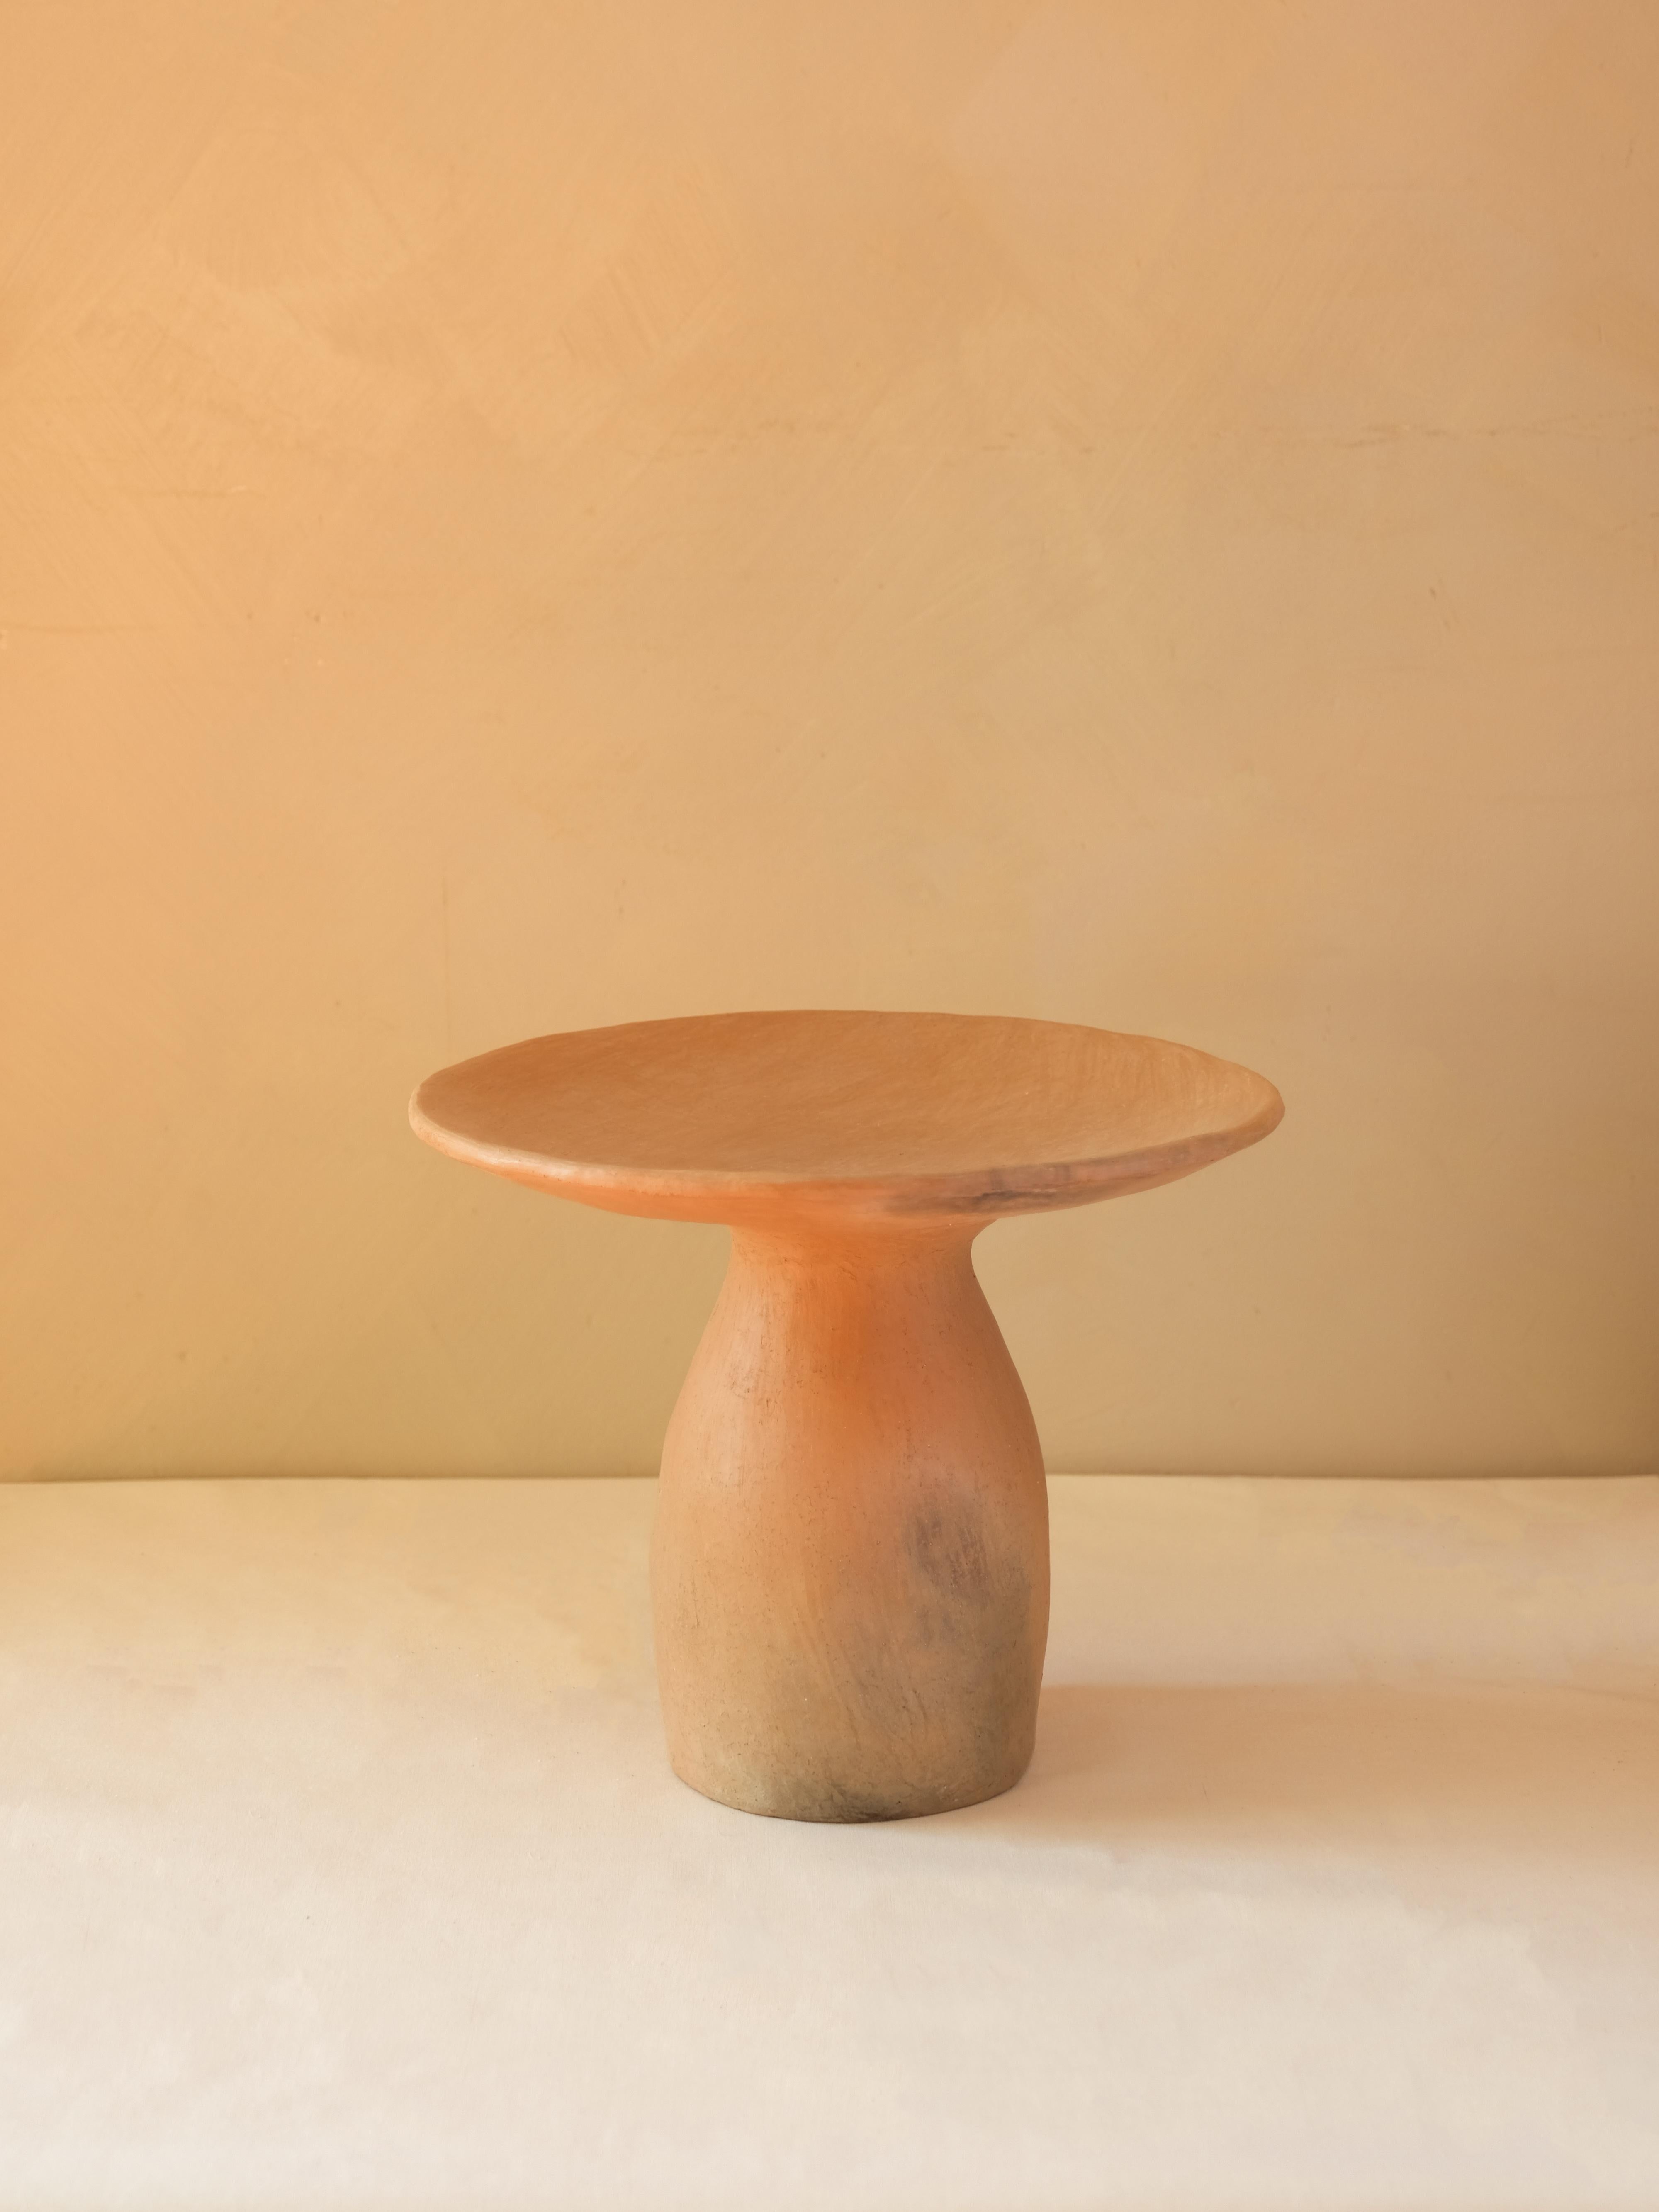 Contemporary Terracotta contemporary Side Tables Made of local Clay, Handbuilt handfired For Sale